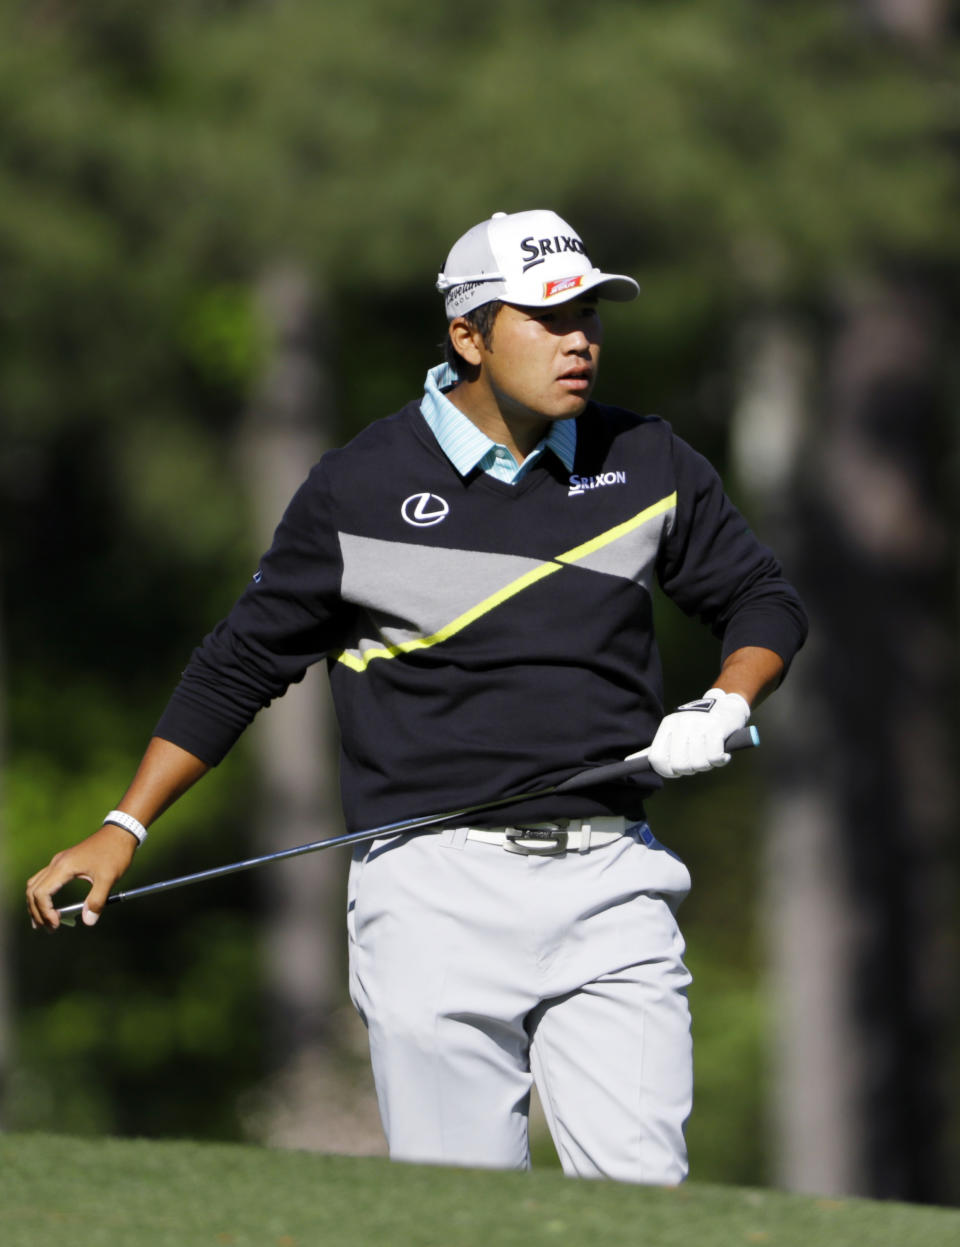 Hideki Matsuyama, of Japan, watches his tee shot on the 12th hole during the third round of the Masters golf tournament Saturday, April 9, 2016, in Augusta, Ga. (AP Photo/David J. Phillip)